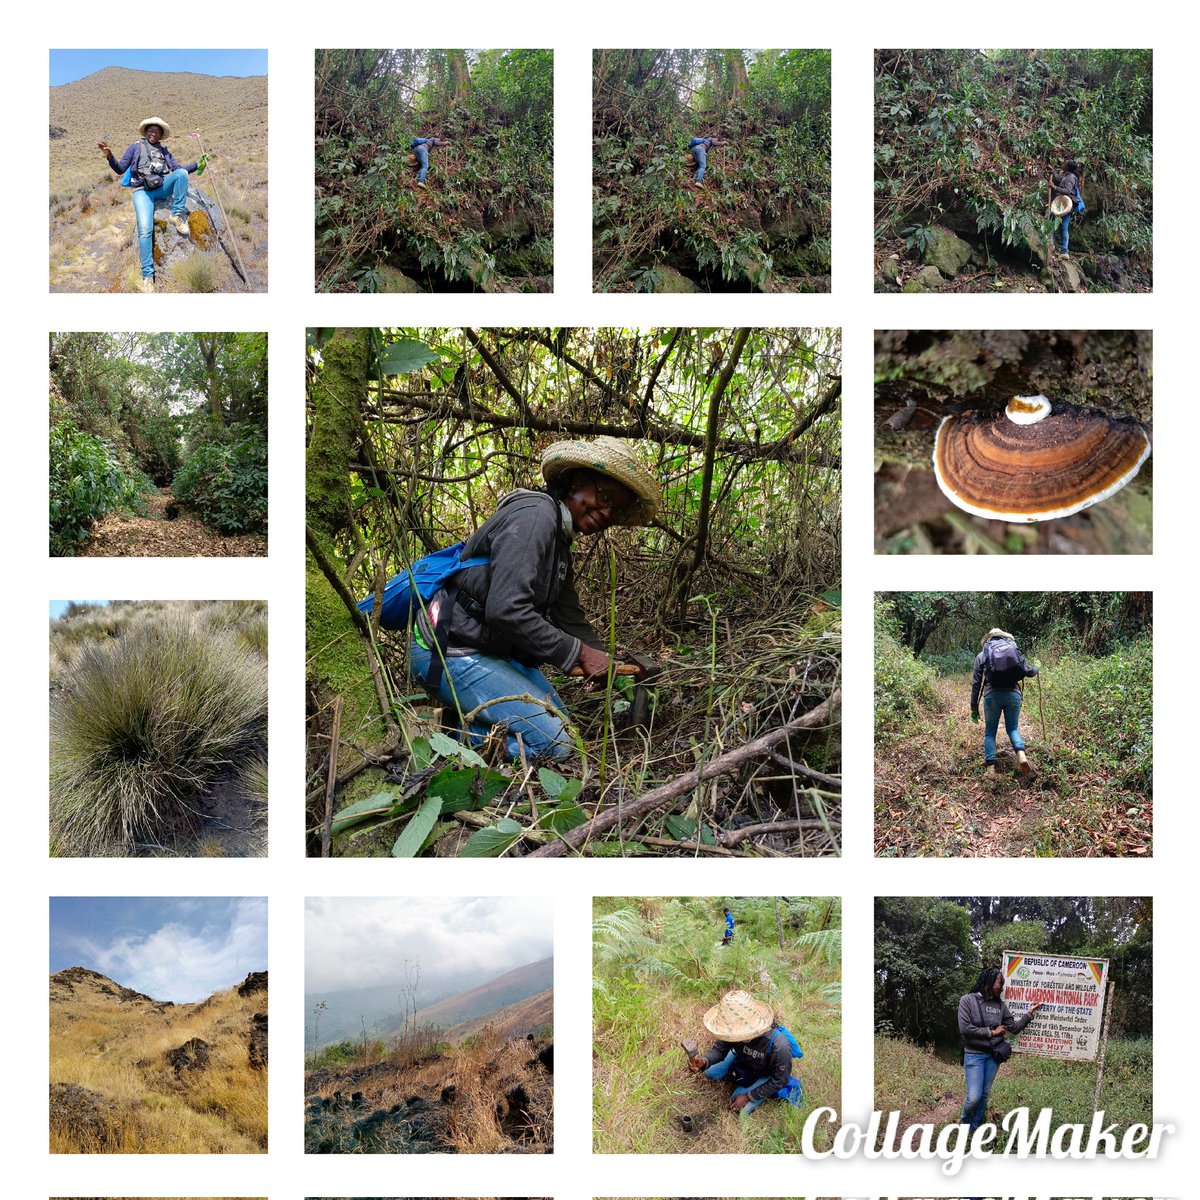 Time of collection of soil samples in Mount Cameroon. It is very interesting to understand how mycorrhization can contribute to the difference in vegetation present in the mountain. @spununderground @adri_corrales33 @INRAE_Intl @BethanFManley @CarolIbe8